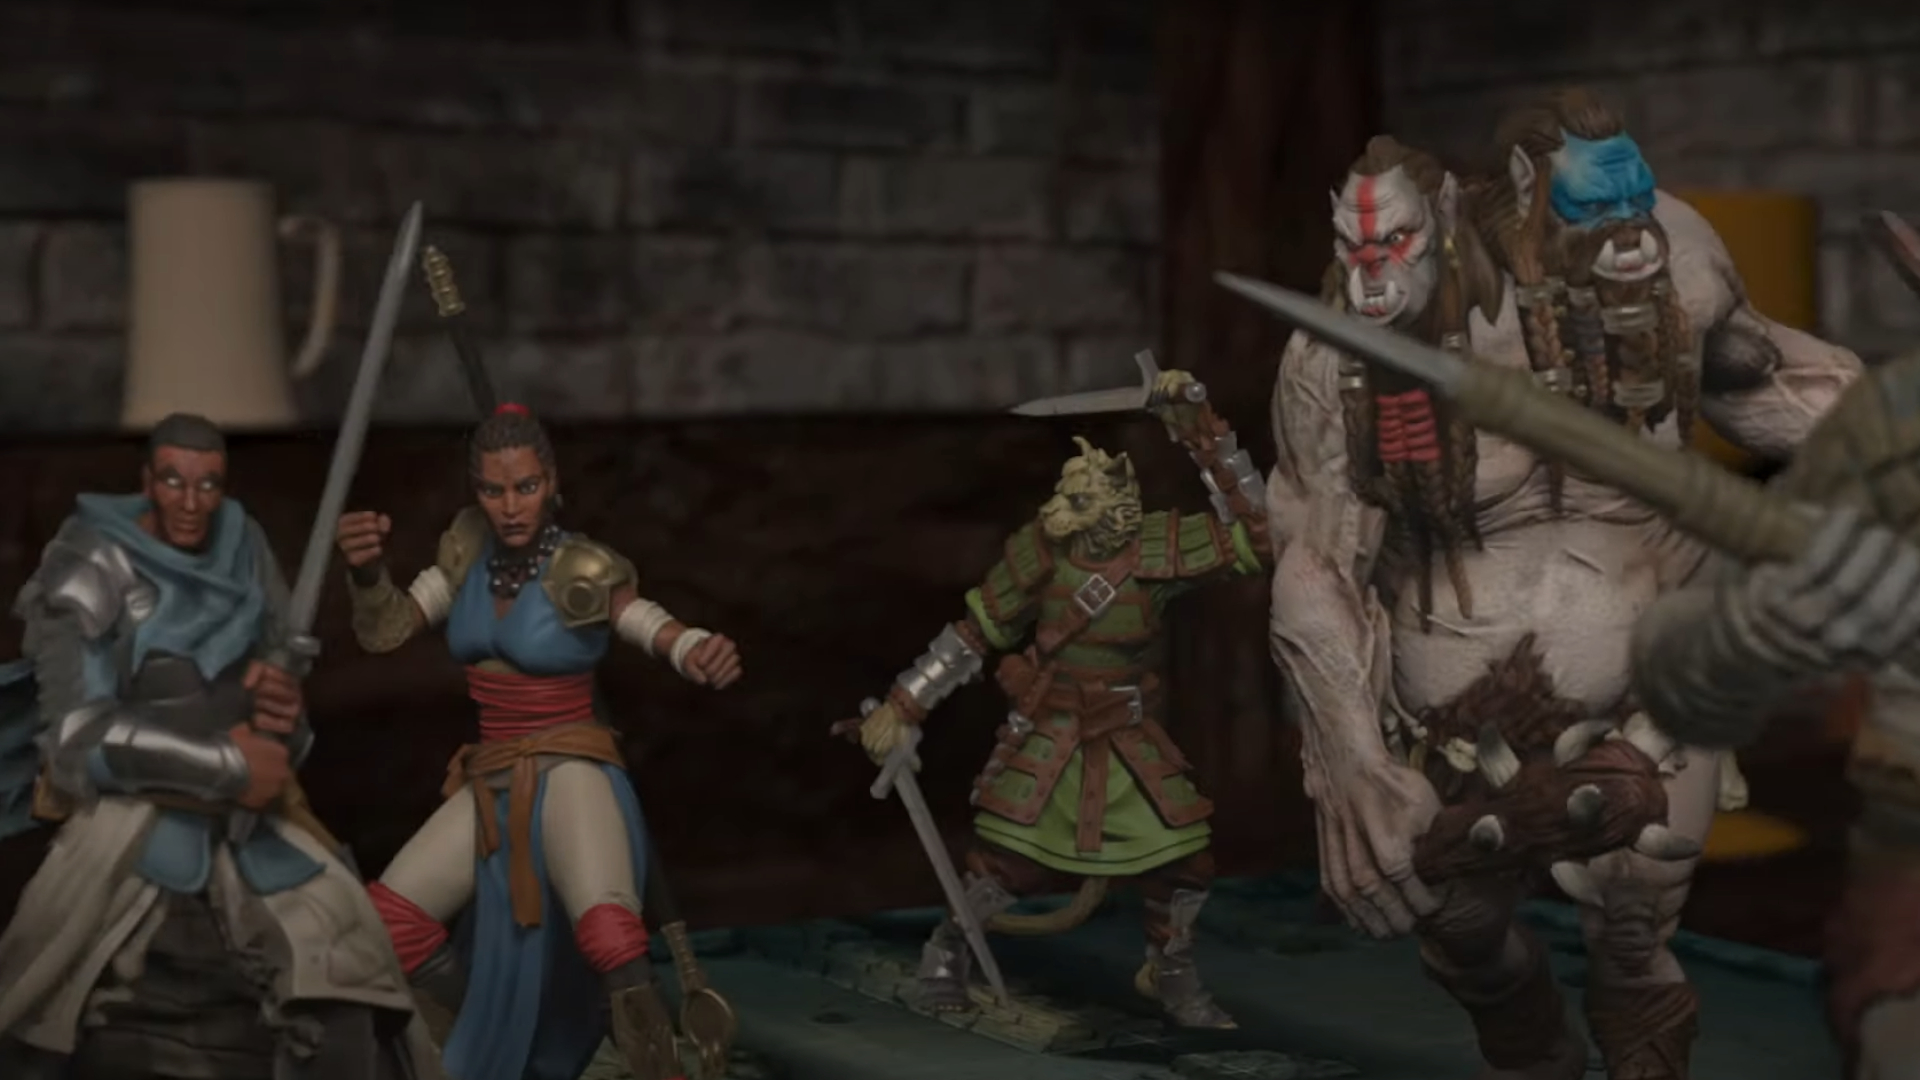 Image from the Dungeons & Dragons: Onslaught trailer